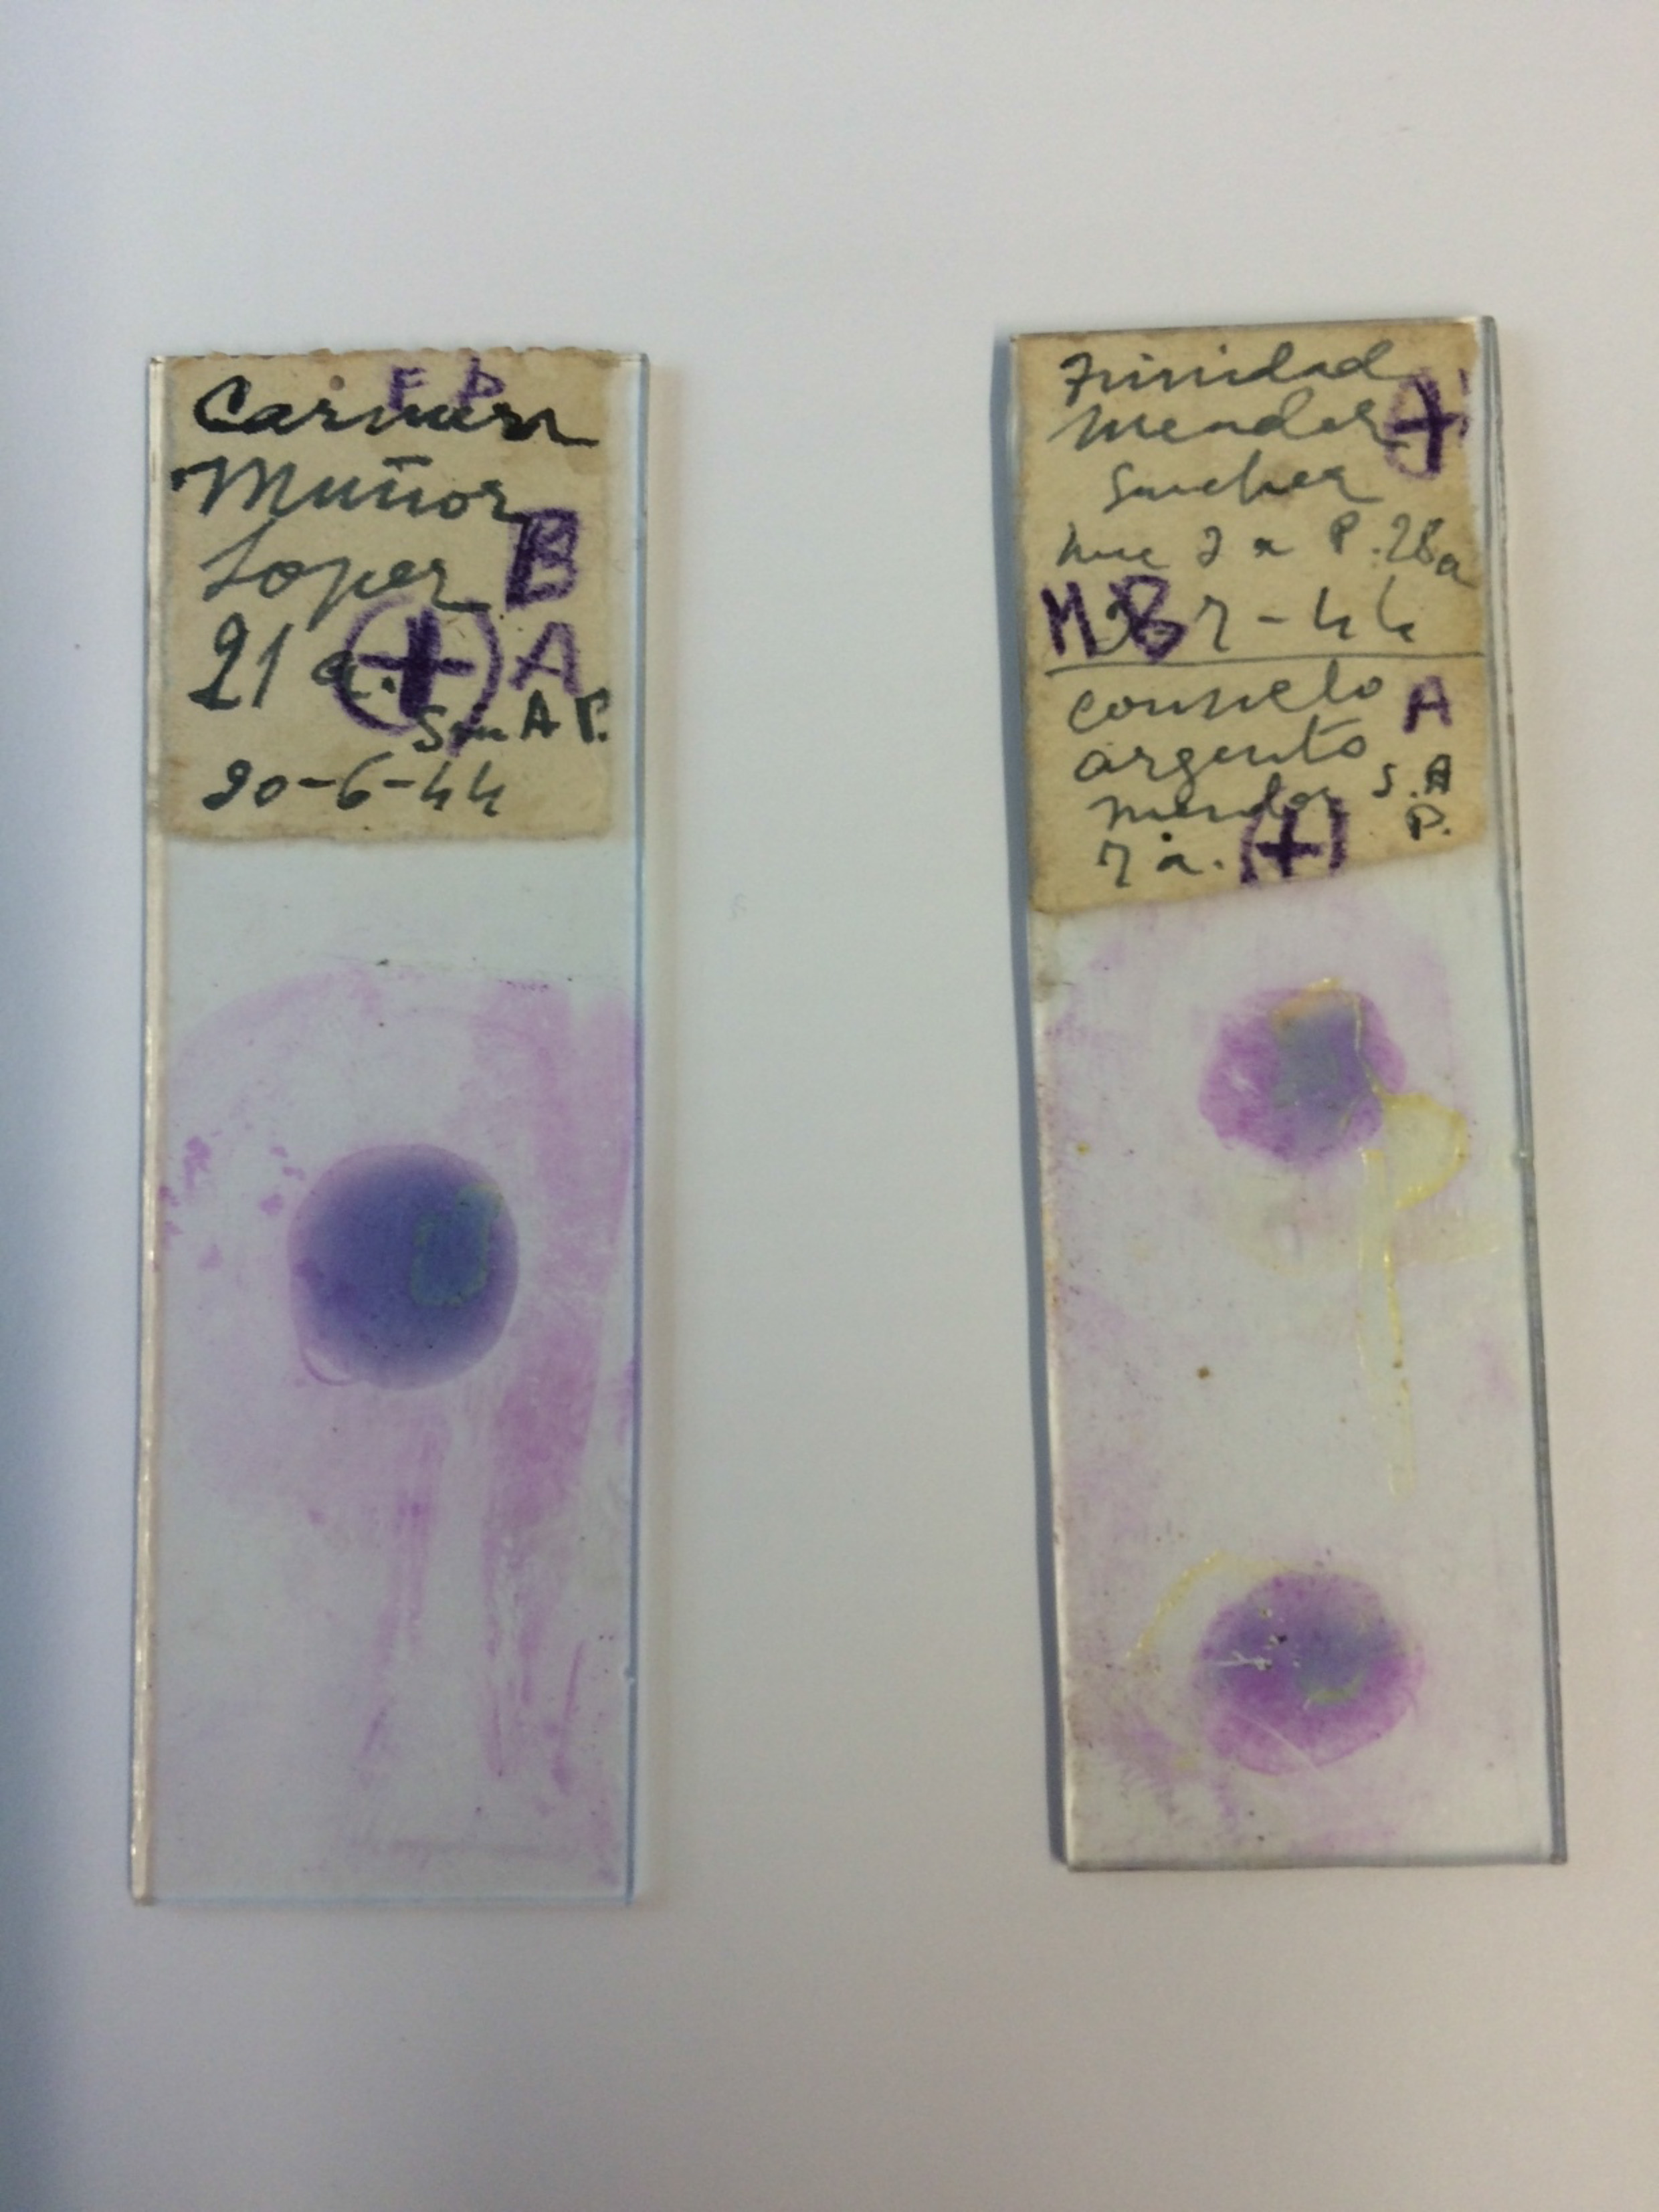 70 year old malaria patients slides.